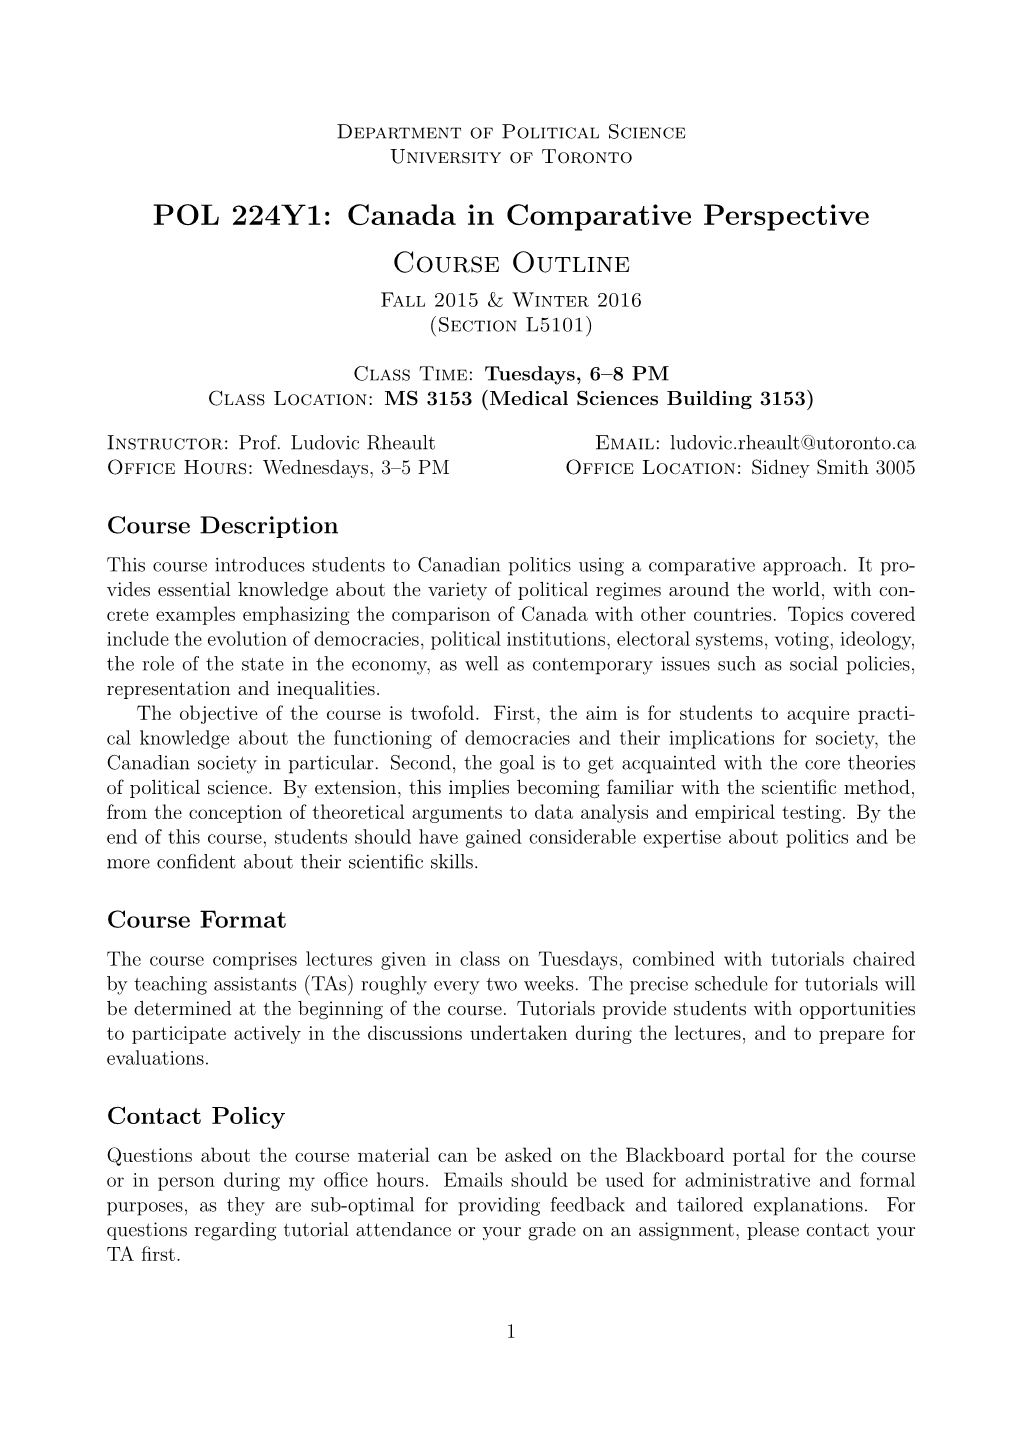 POL 224Y1: Canada in Comparative Perspective Course Outline Fall 2015 & Winter 2016 (Section L5101)